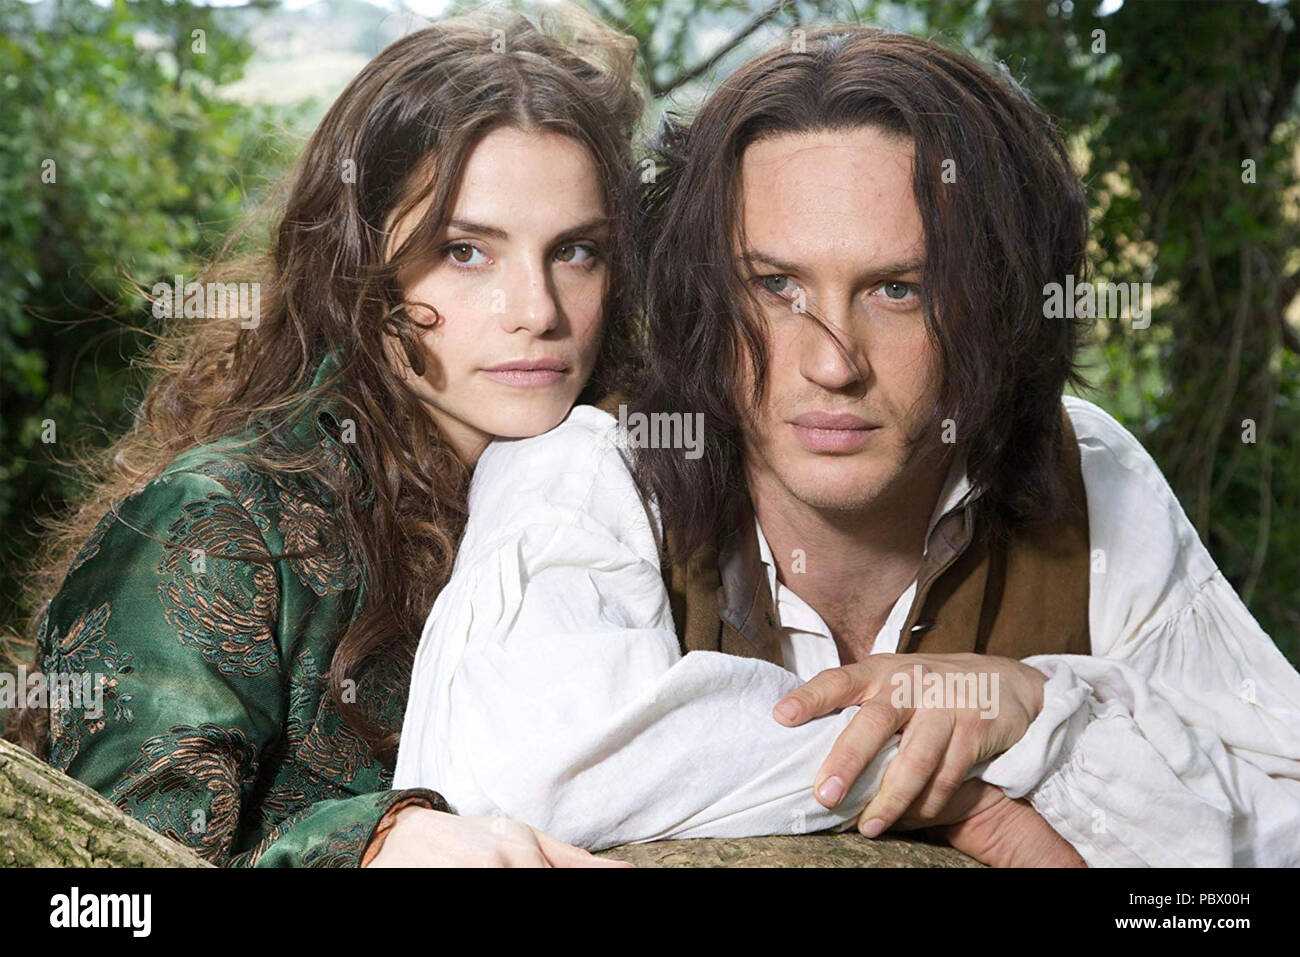 WUTHERING HEIGHTS 2009 ITV-TV-Serie mit Tom Hardy und Charlotte Riley Stockfoto